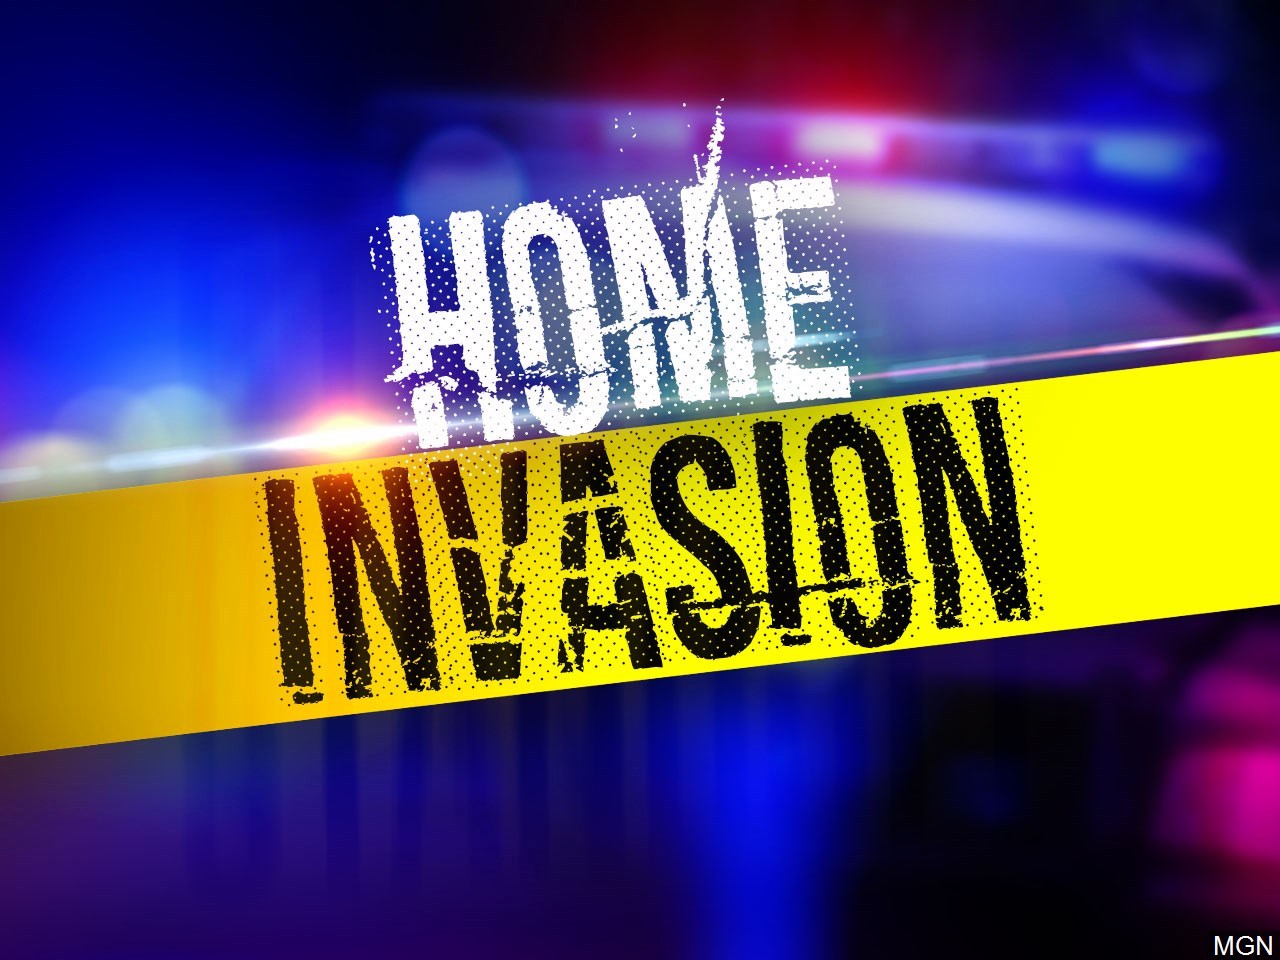 3 Armed Men Go Into Whim Home, Tie Up Owner Looking For Valuables Today: VIPD